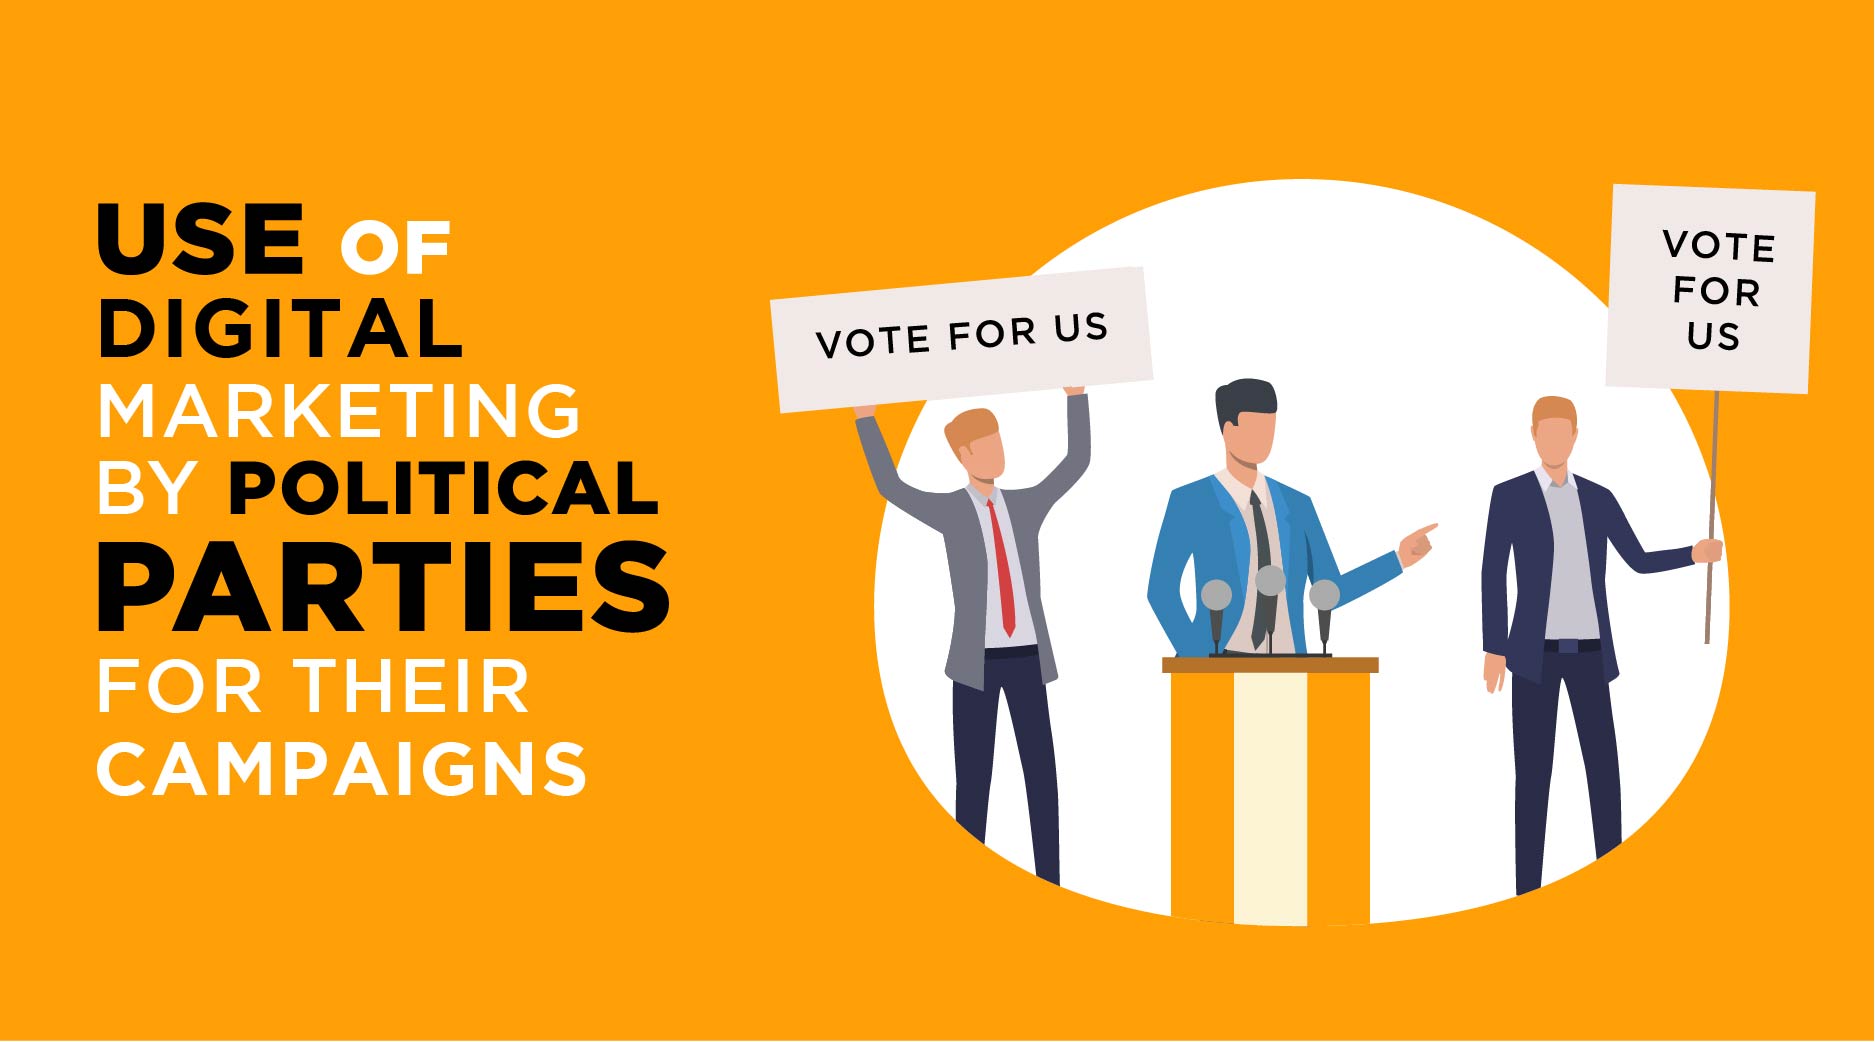 Use of Digital Marketing by Political Parties for their Campaigns